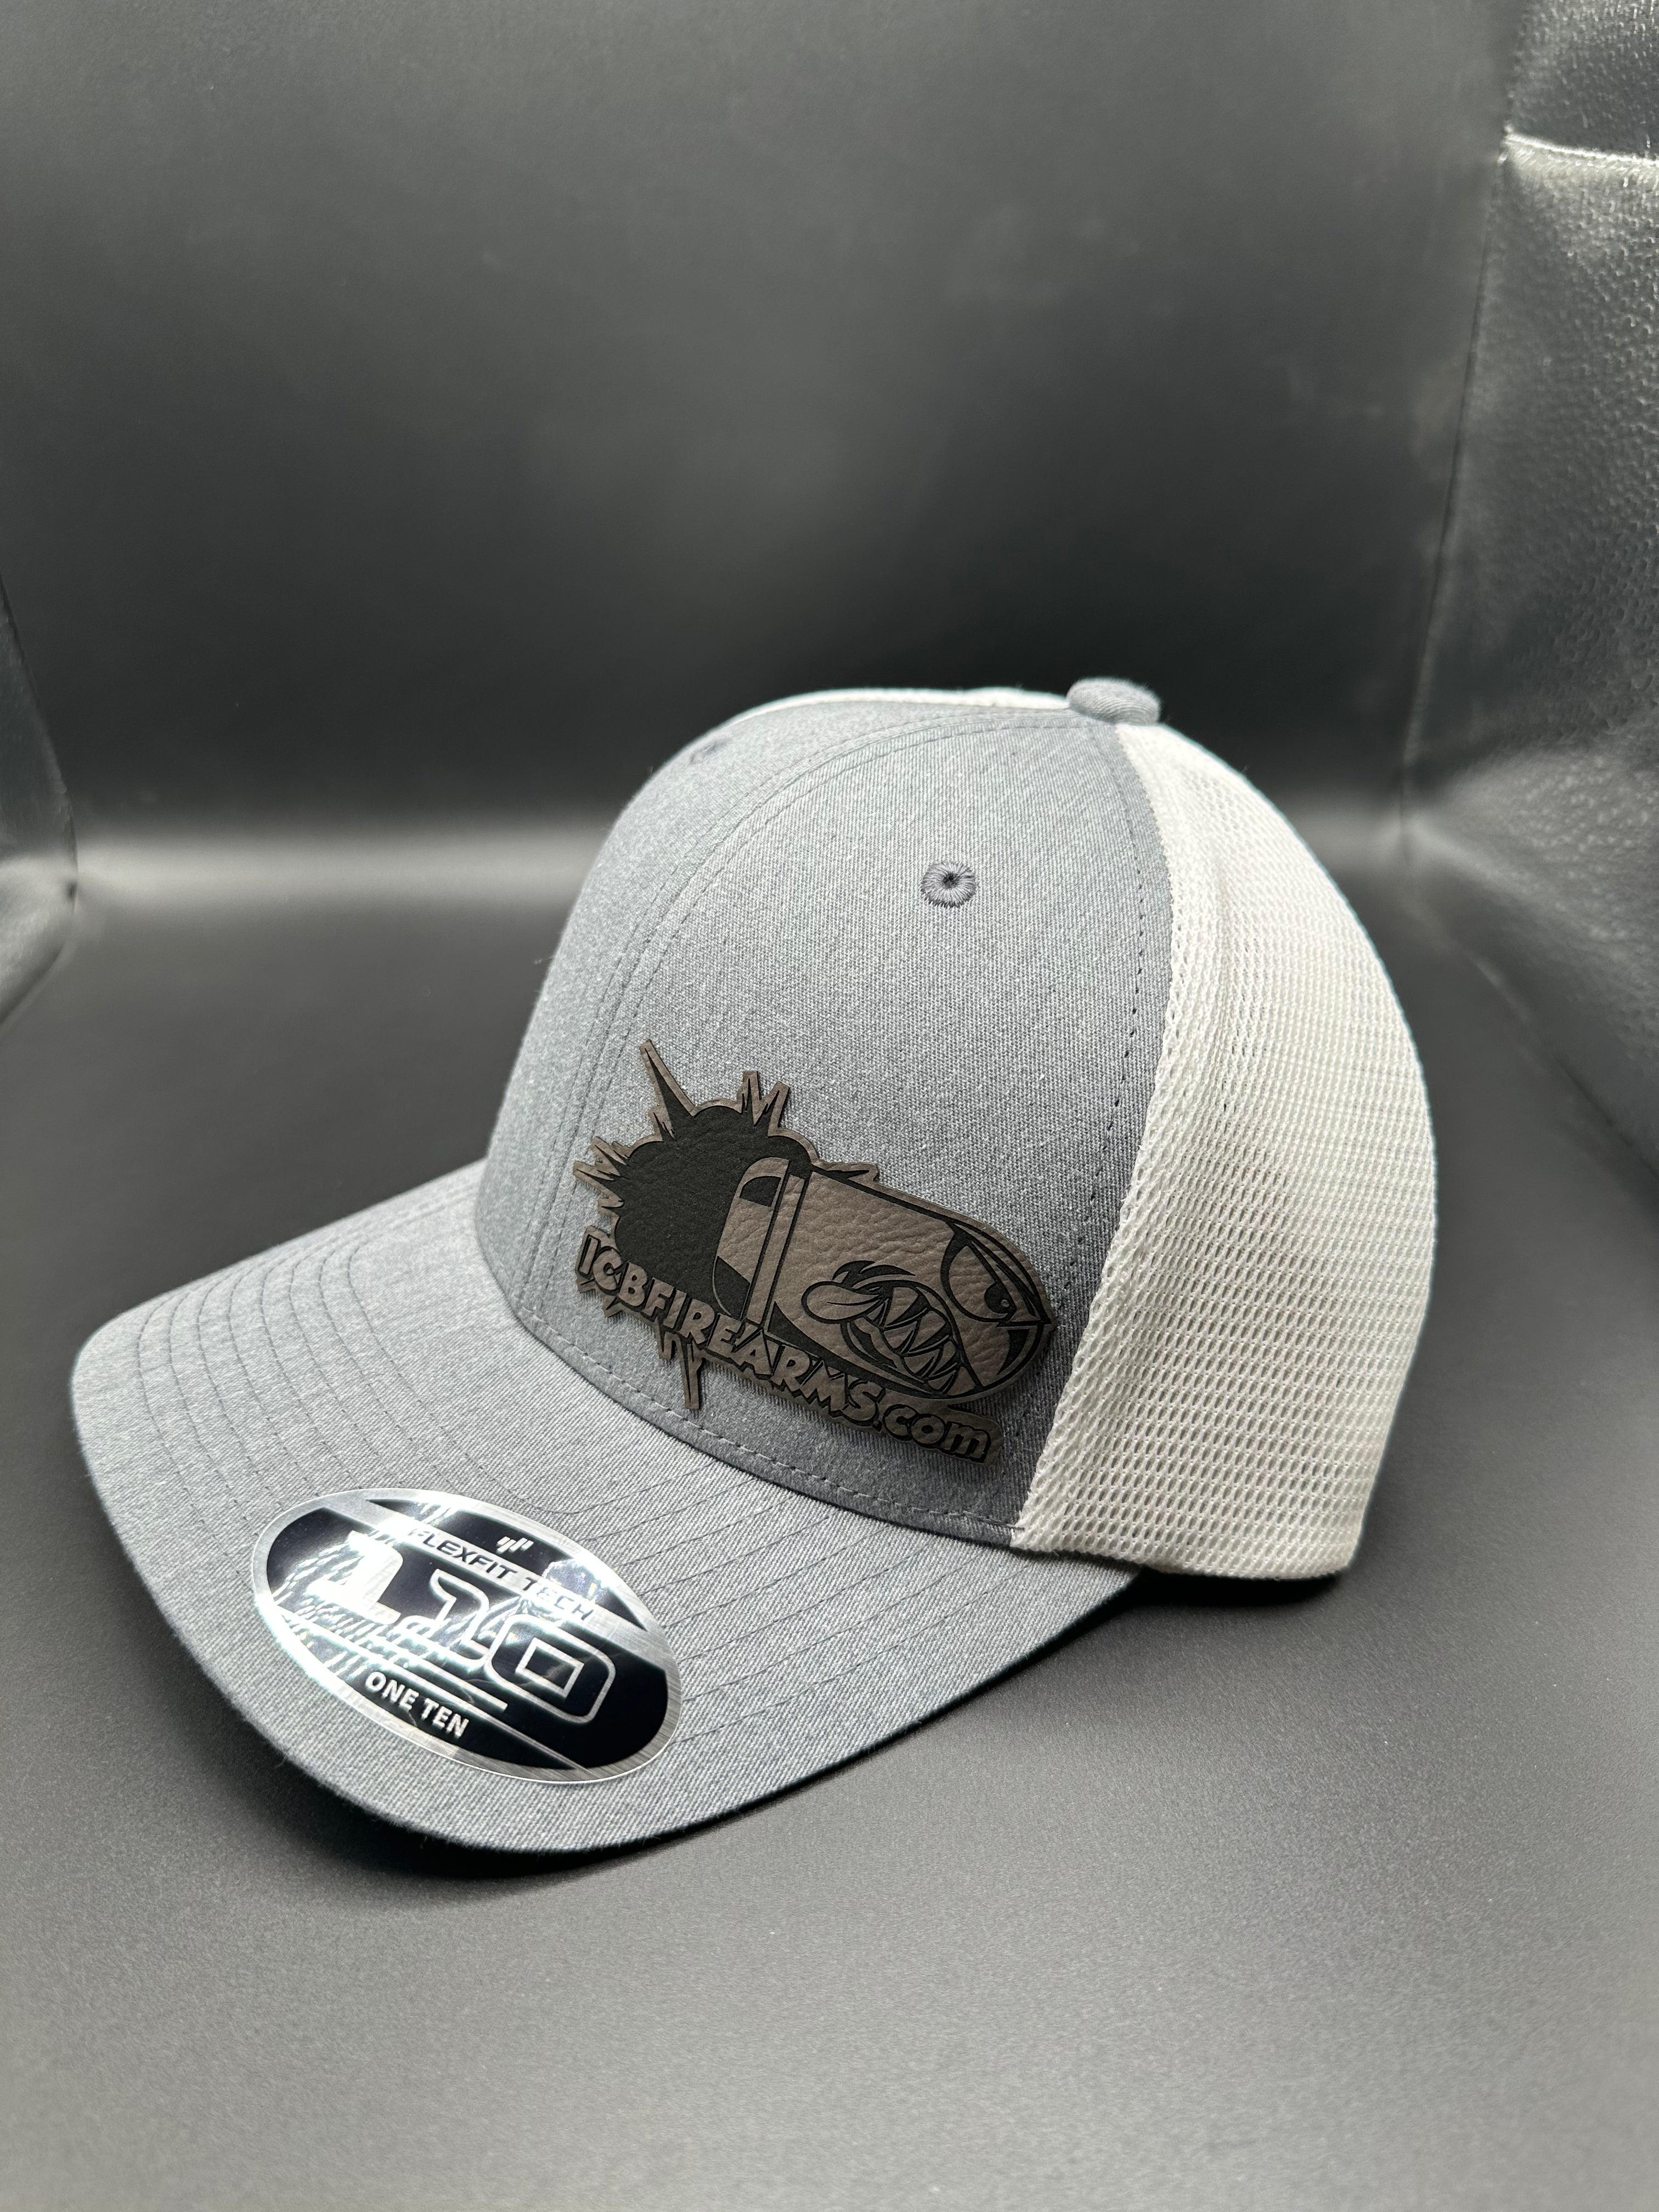 ICB Heather Grey/White FlexFit SnapBack – Warrior Flags And Engraving